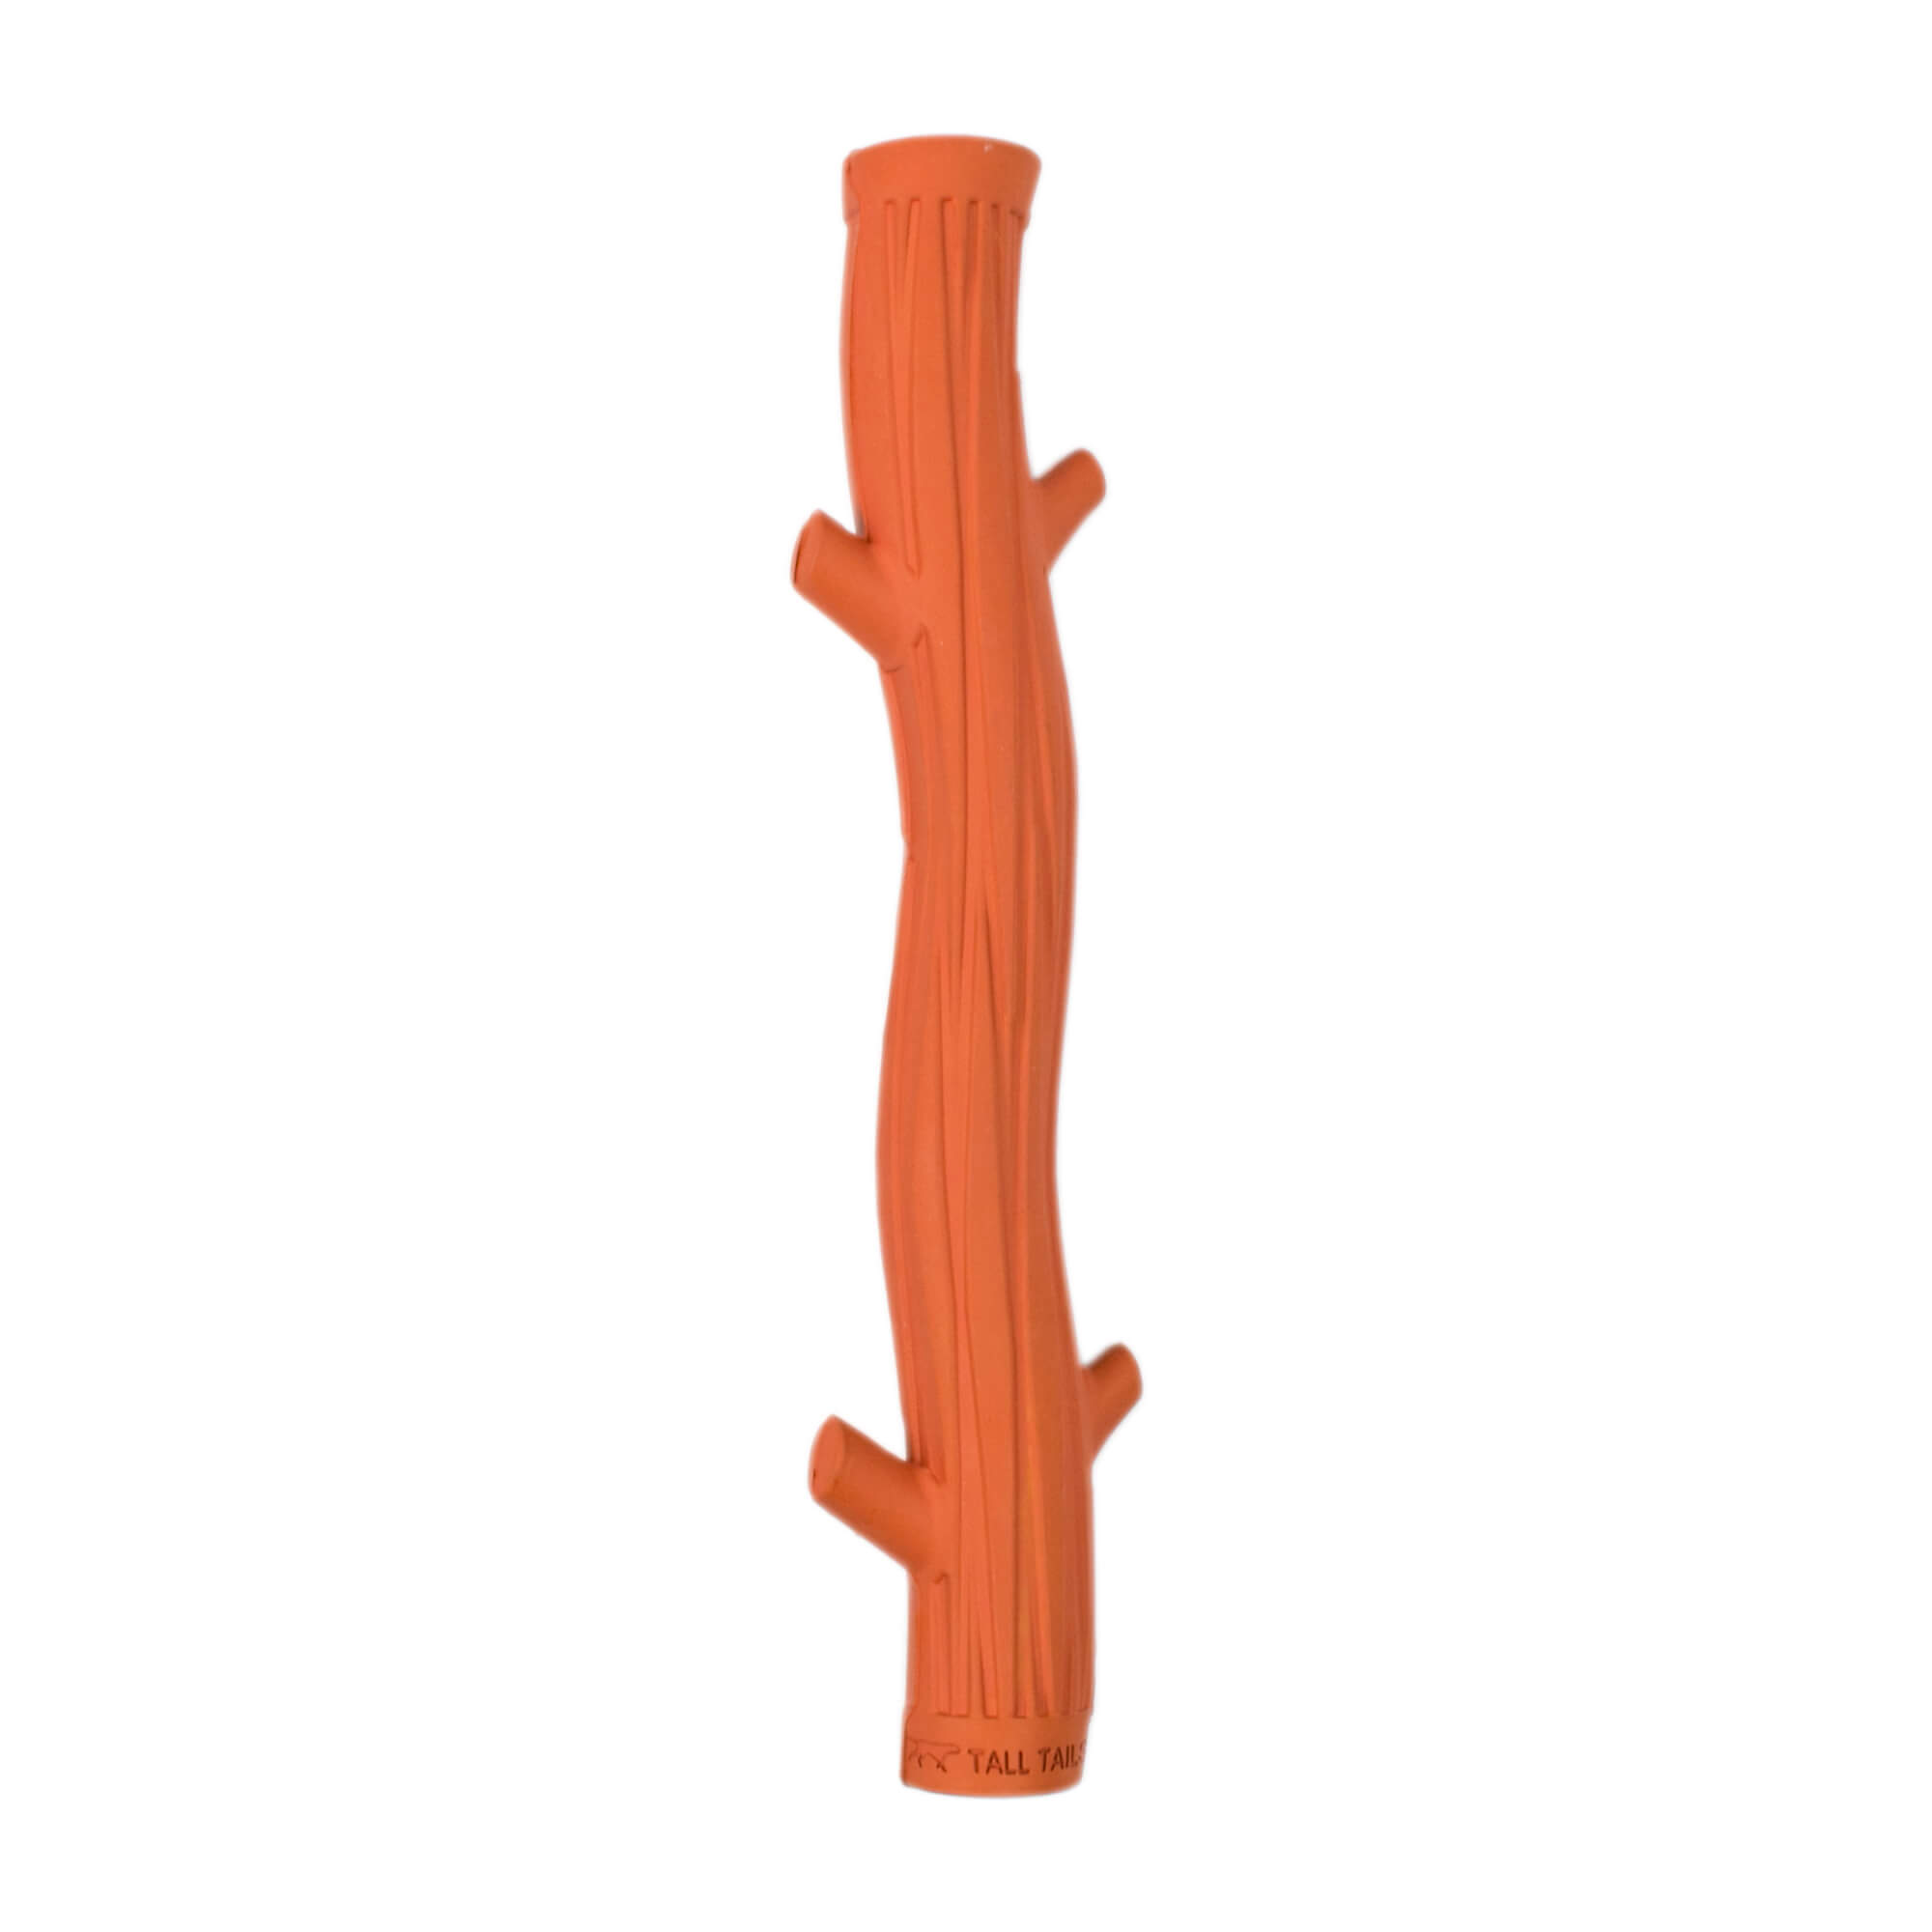 Tall Tails orange rubber stick dog toy vertical